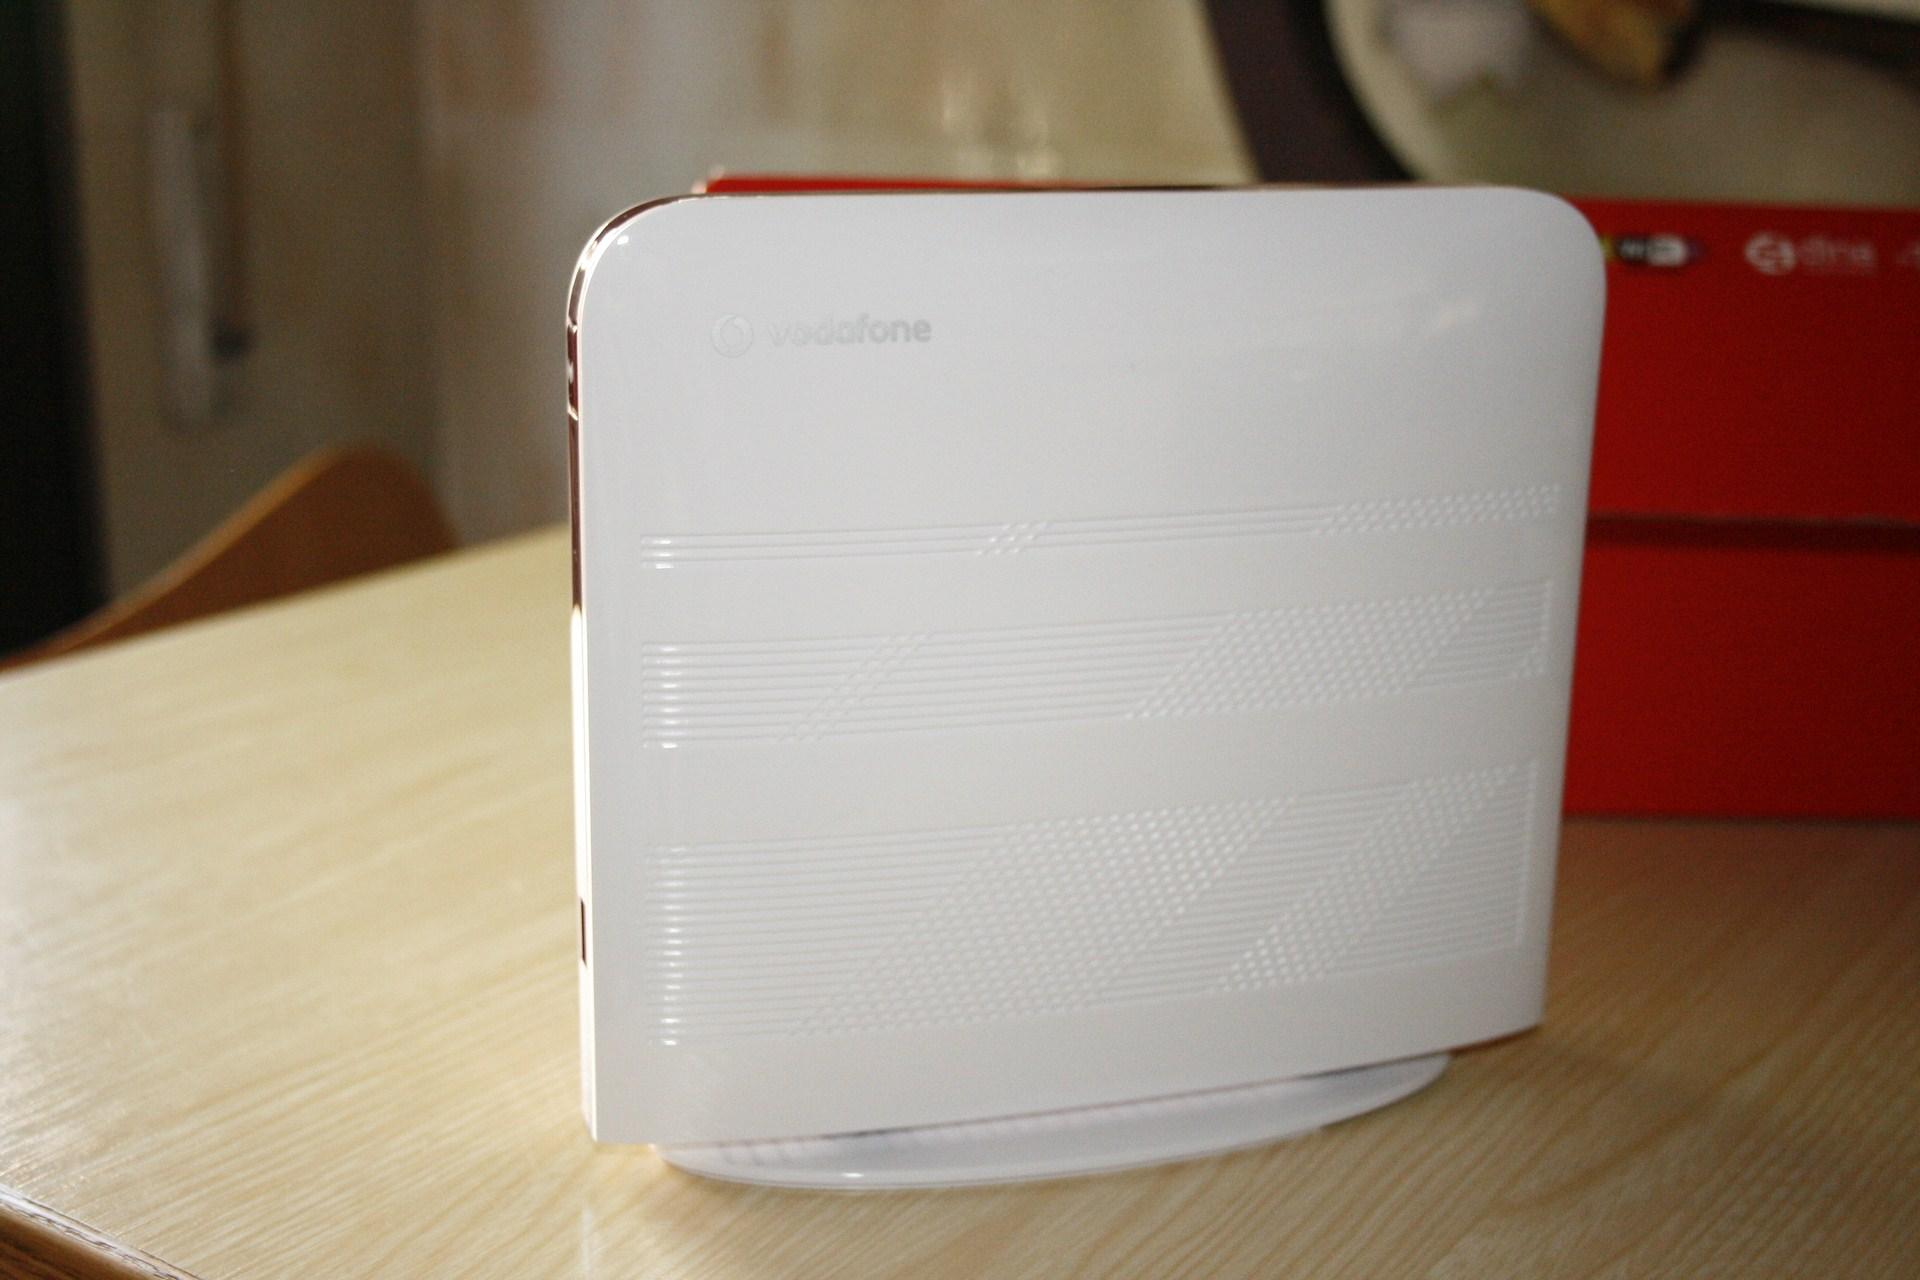 Vista frontal del router Huawei HG556a